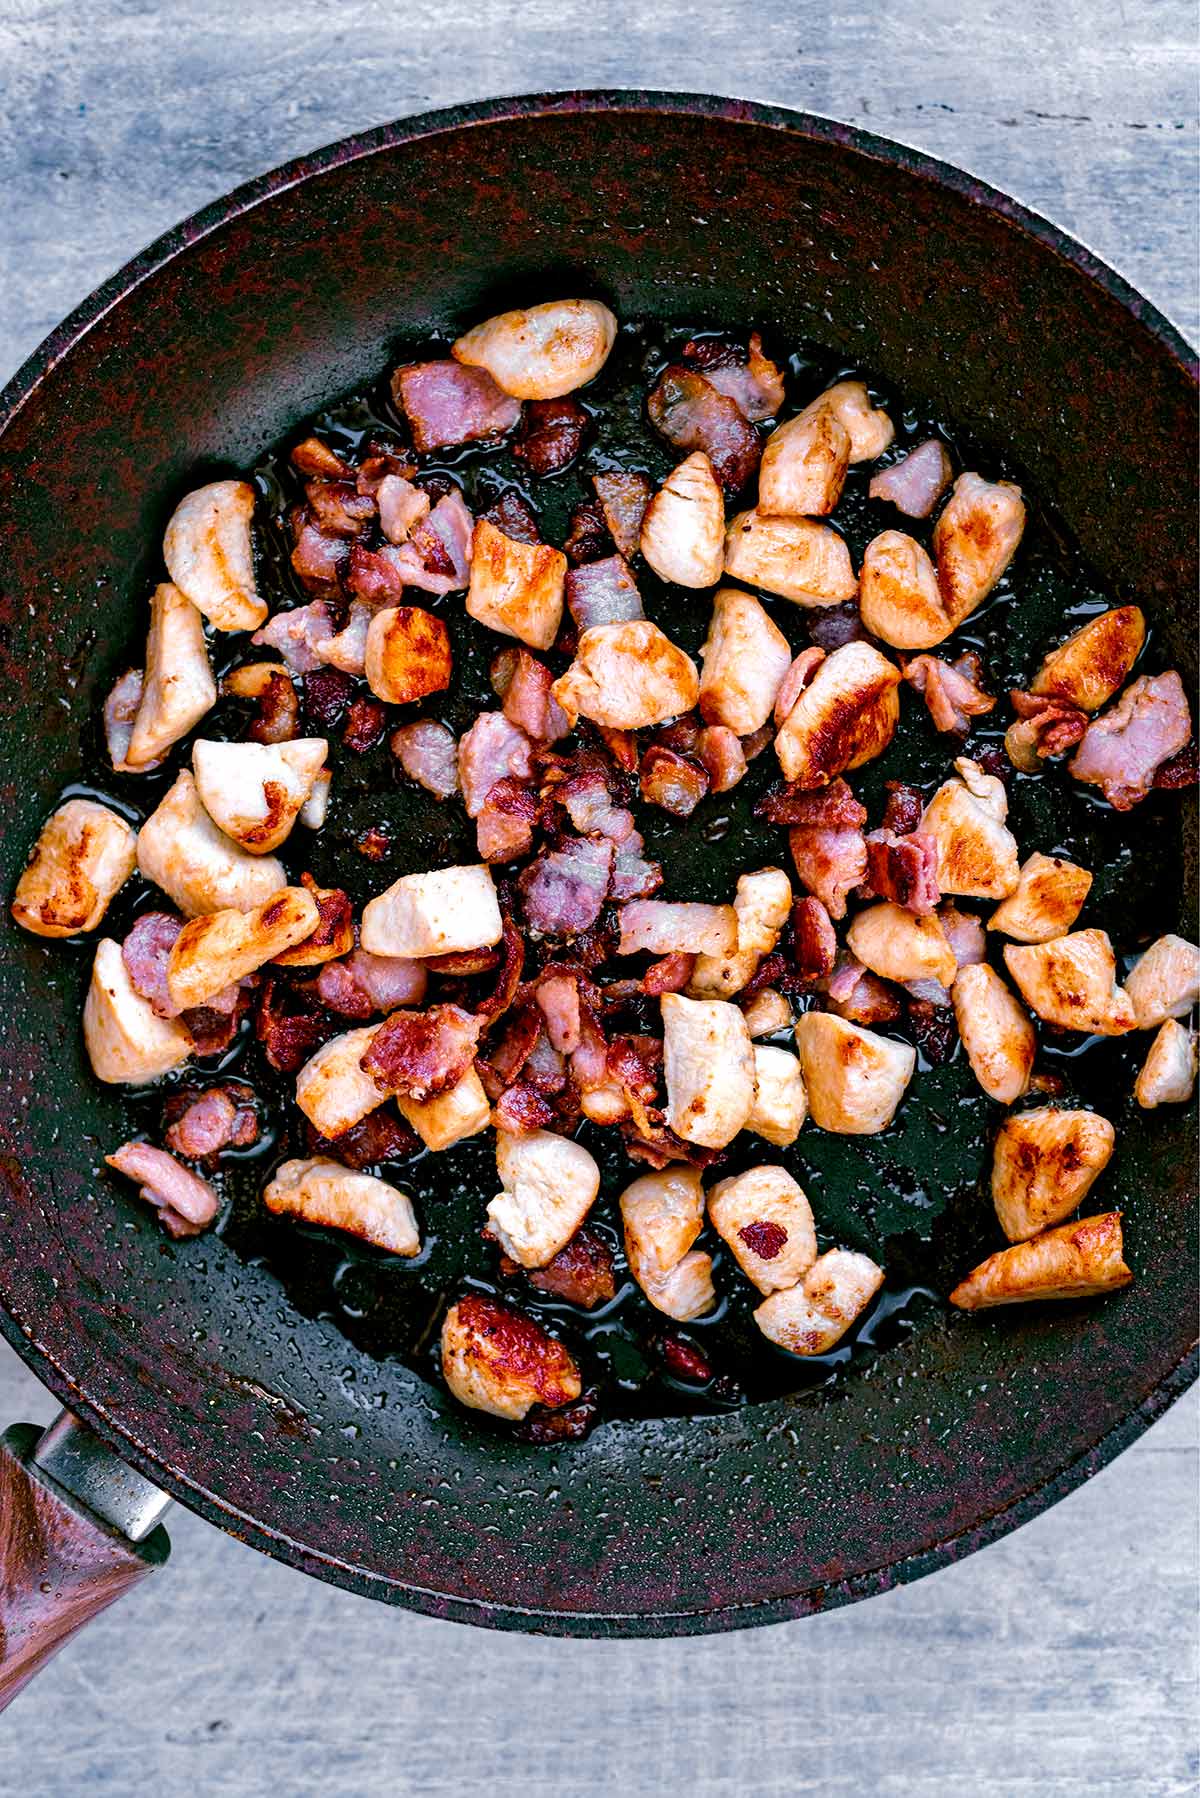 Chunks of chicken and chopped bacon cooking in a frying pan.